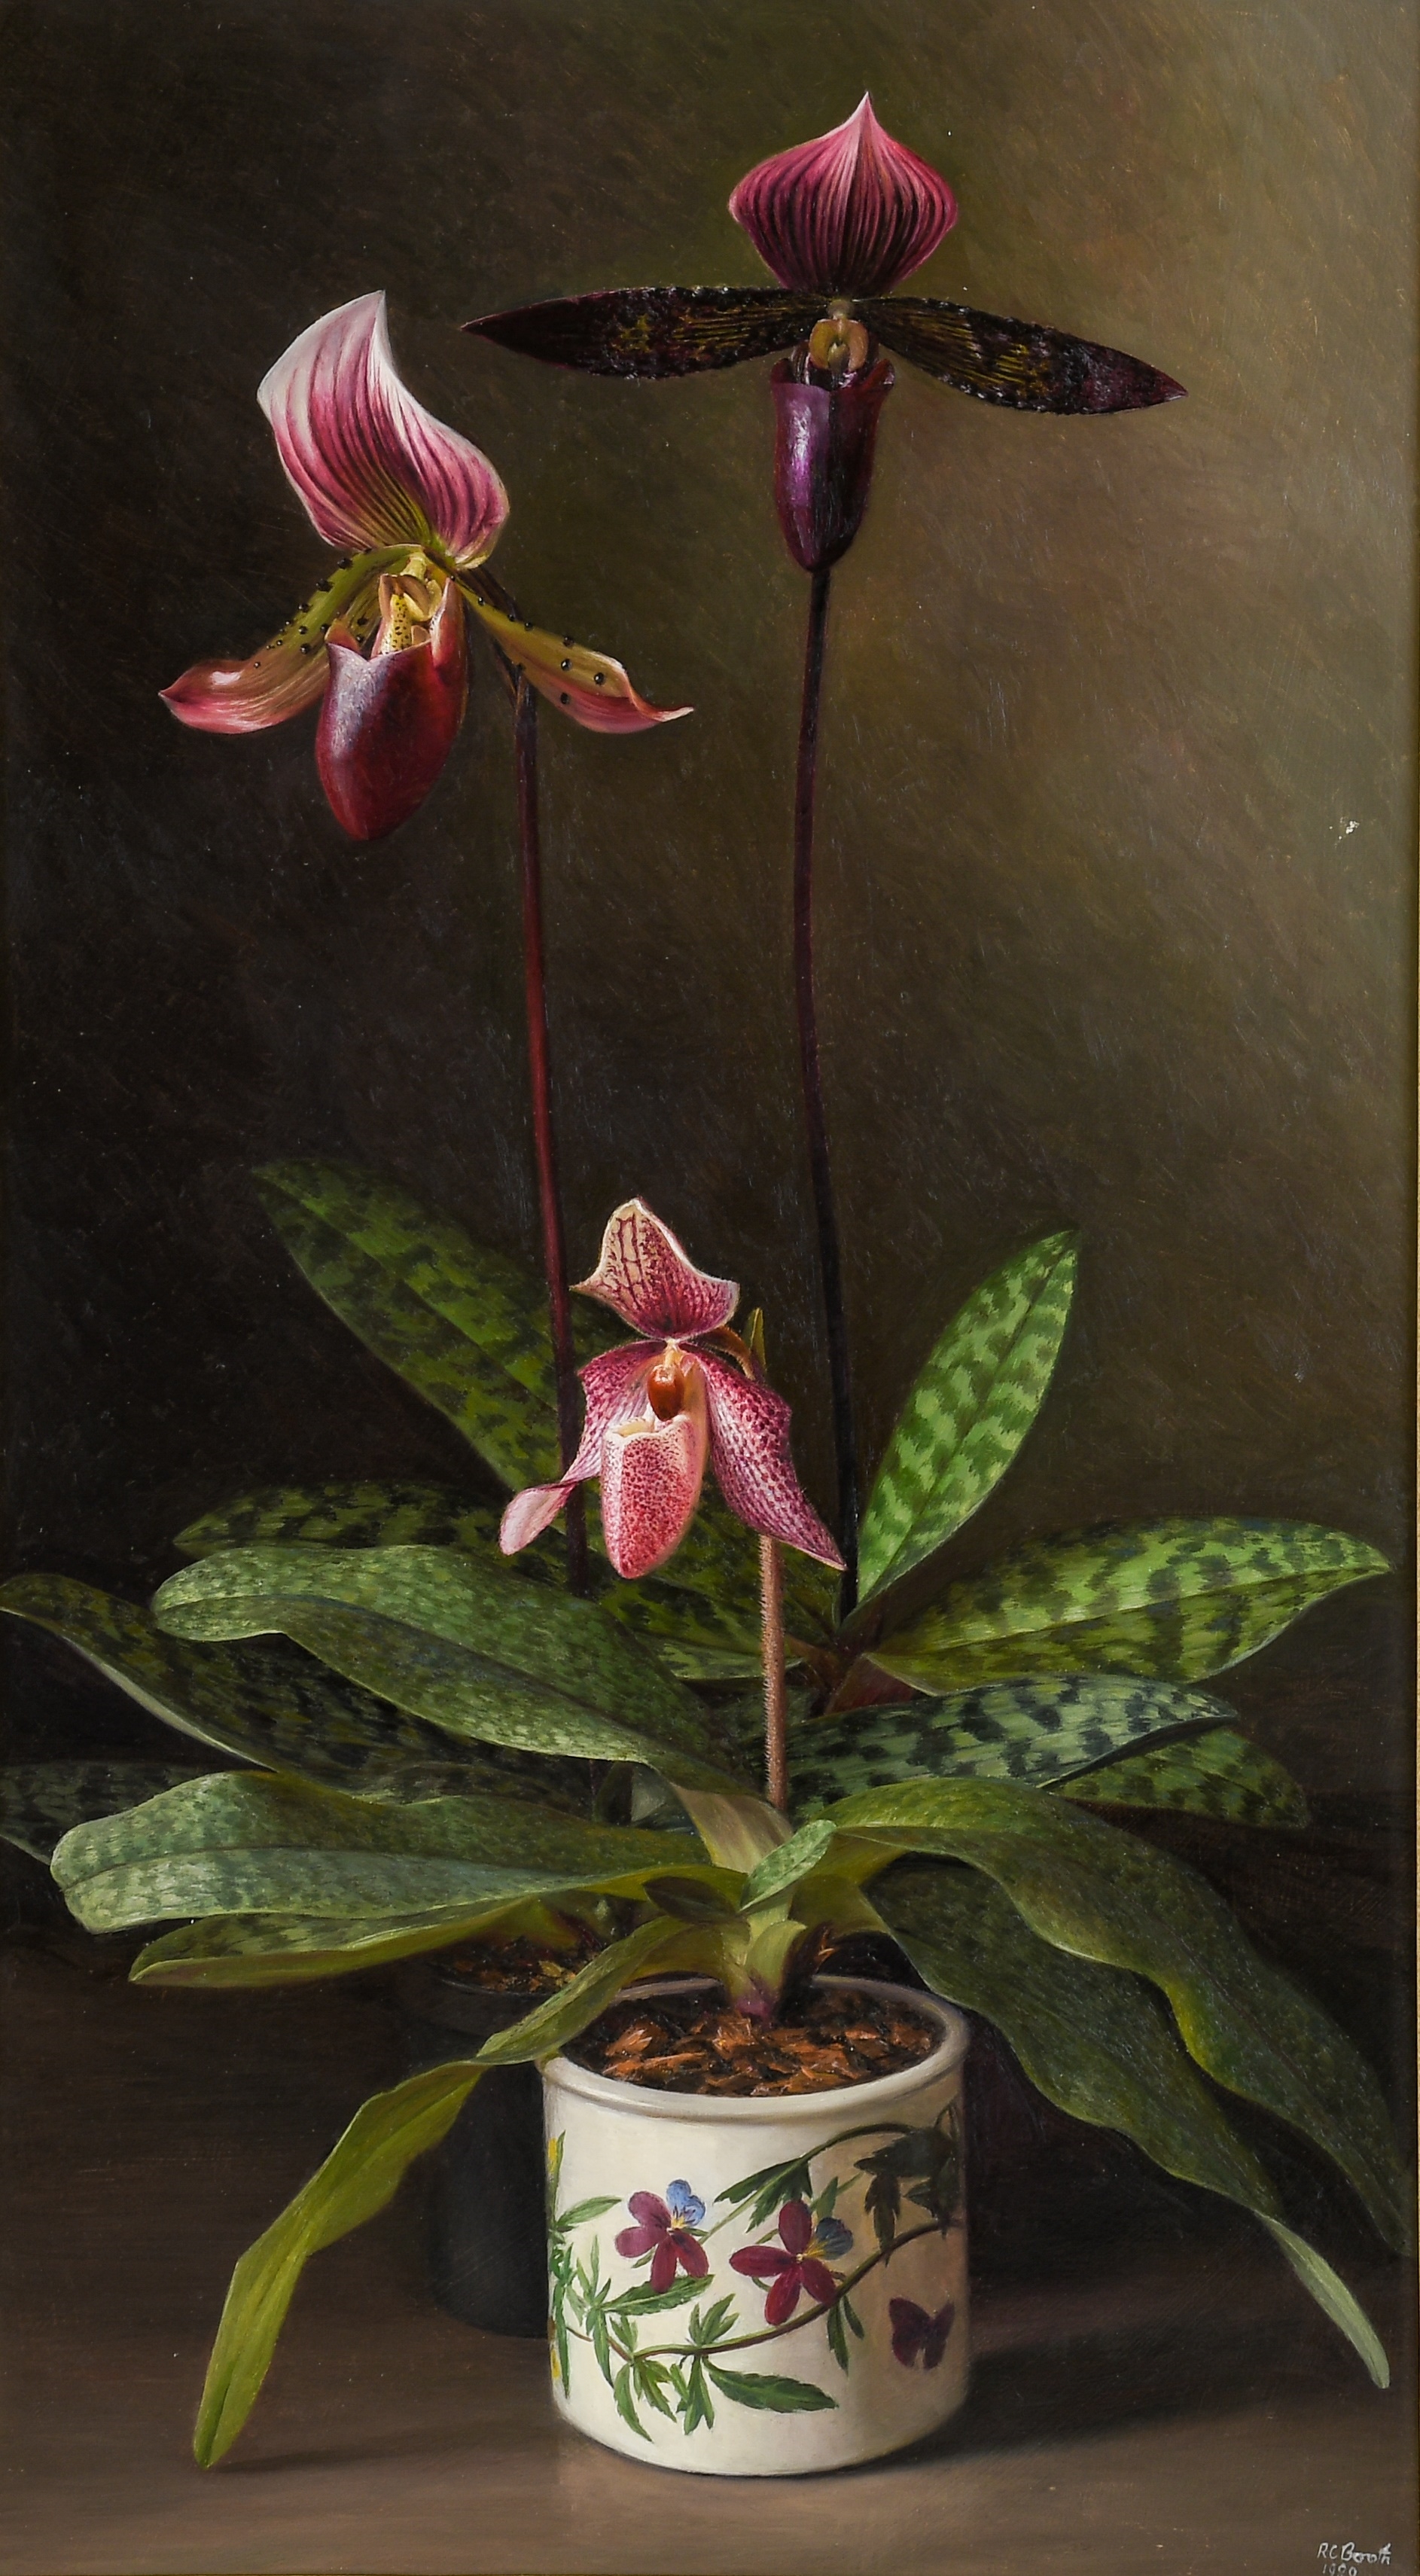 “The Slipper Orchids” by Raymond Booth, 1989